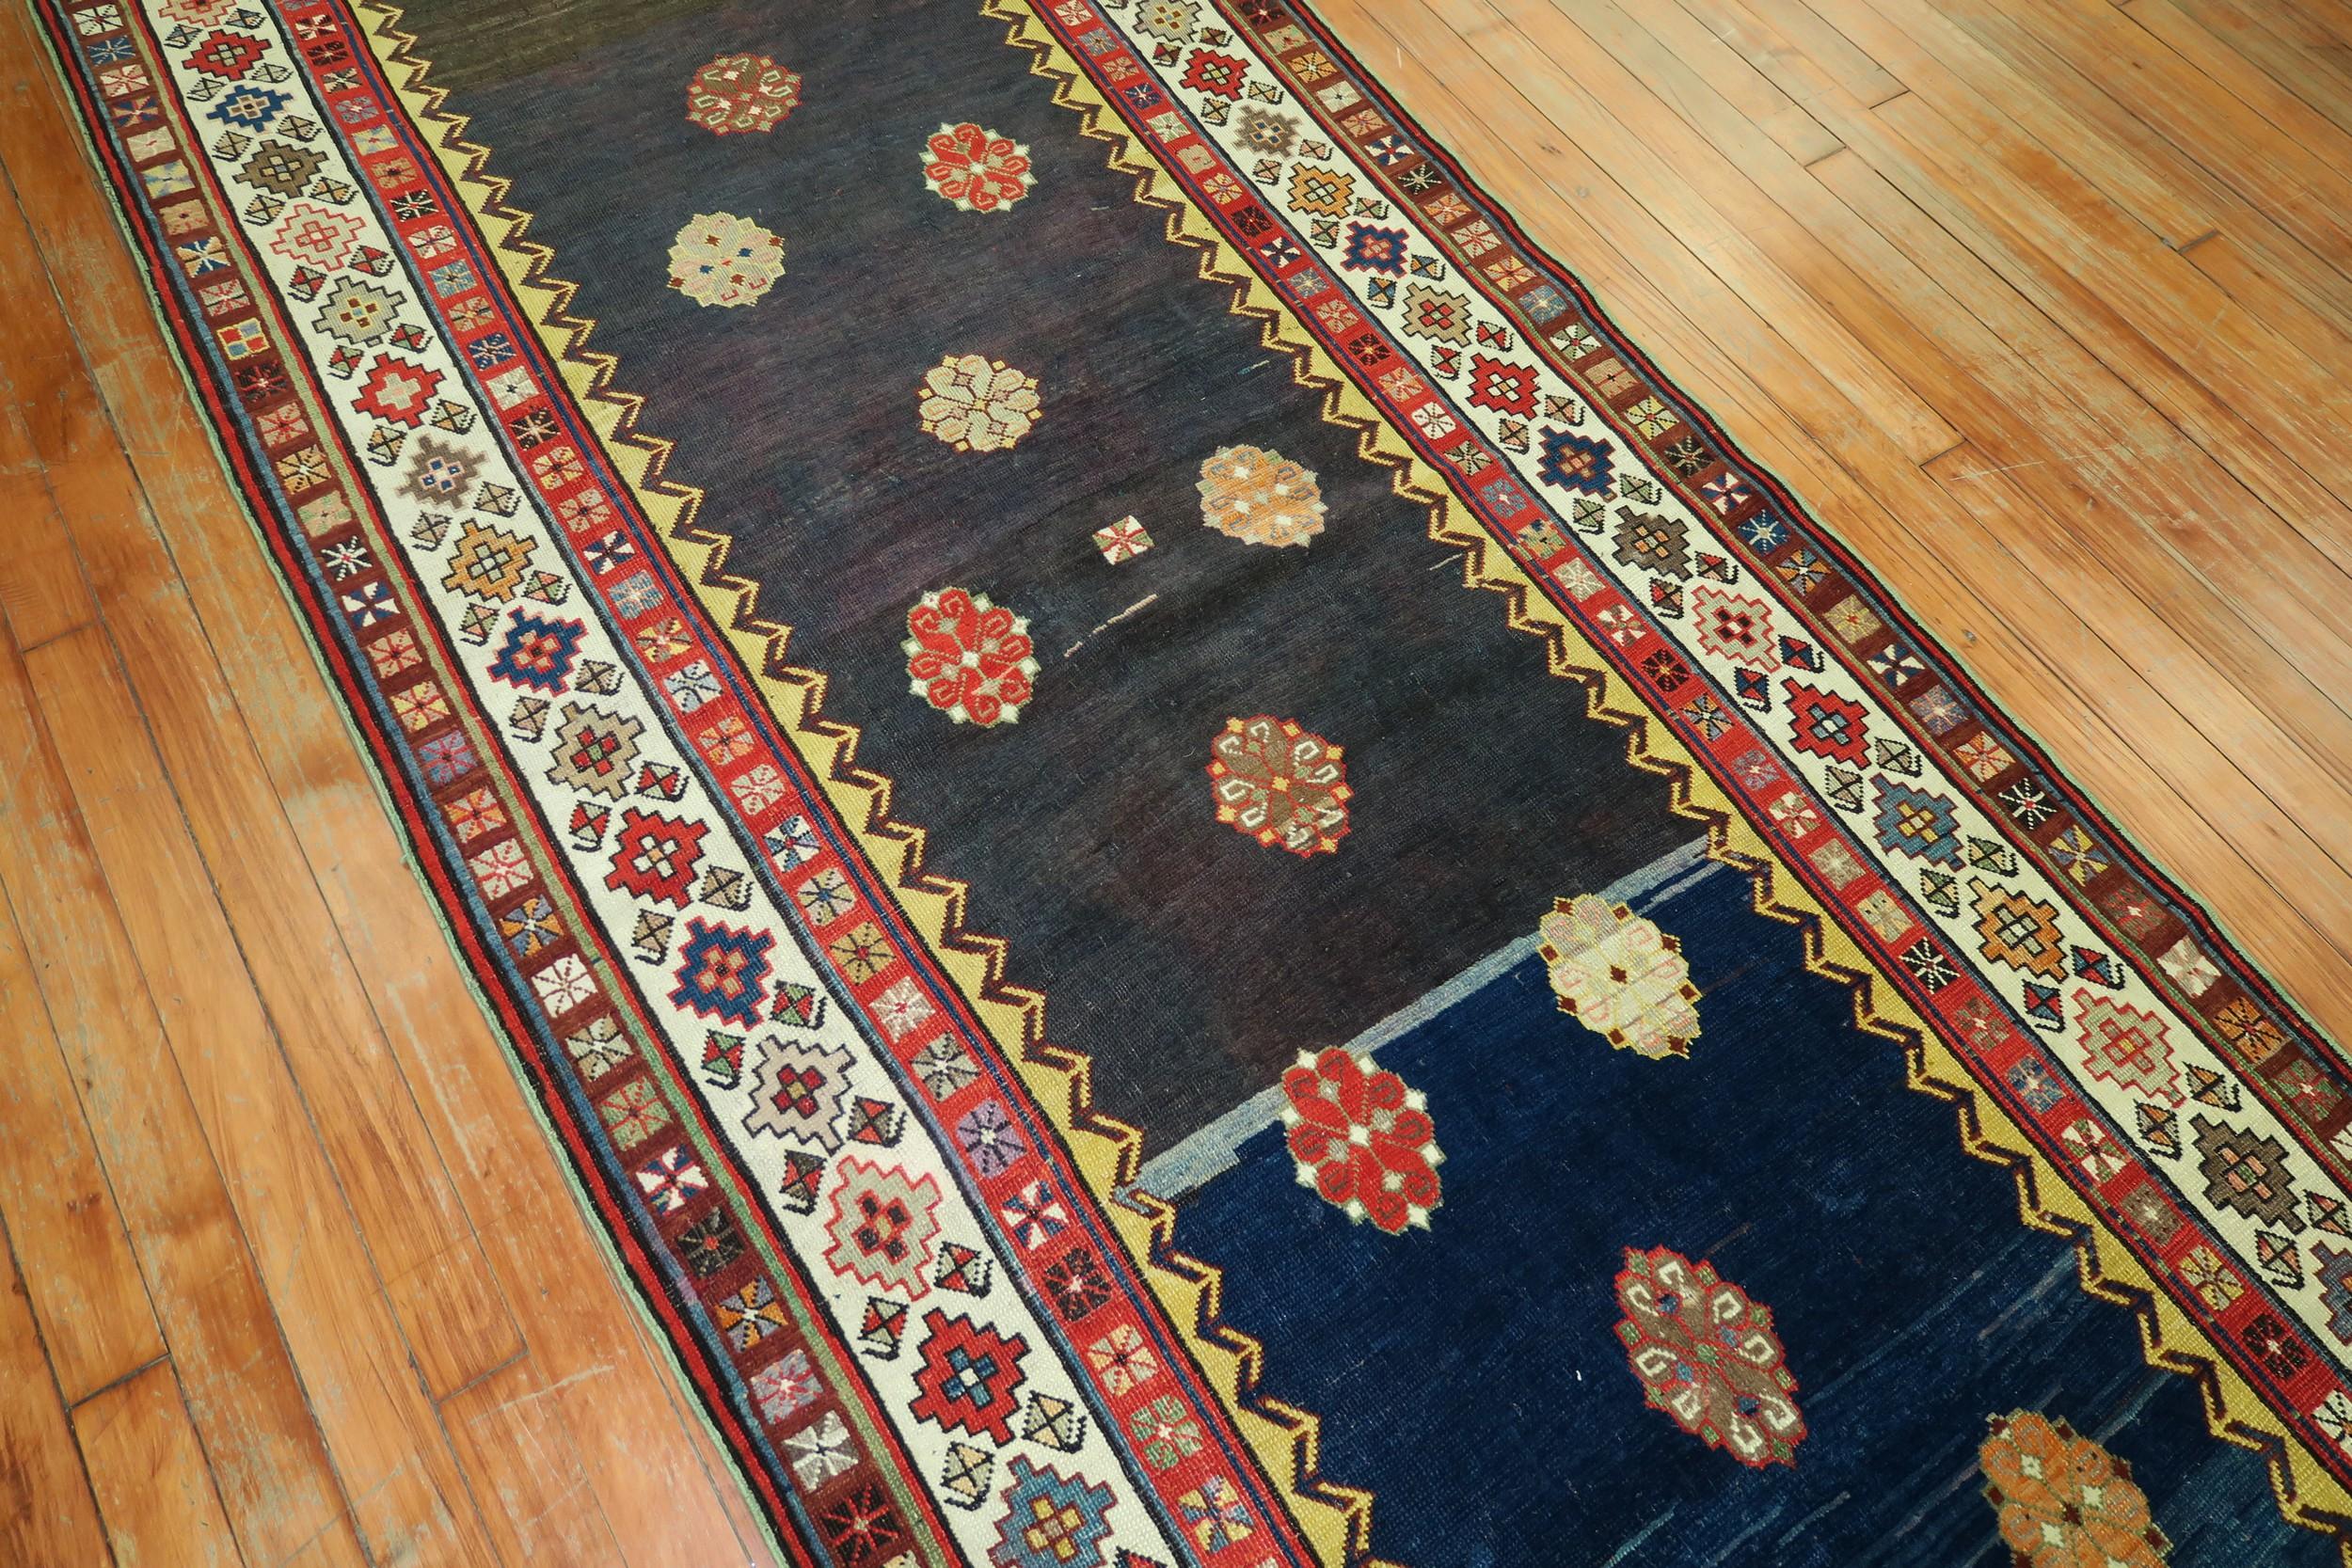 An eclectic Talish runner with a striated blue and navy ground surrounded by a colorful geometric border. The quality is very good. It’s a dramatic runner that would add a new soul to any given hallway, circa 1900

Measures: 3'6” x 9'2”

Talish